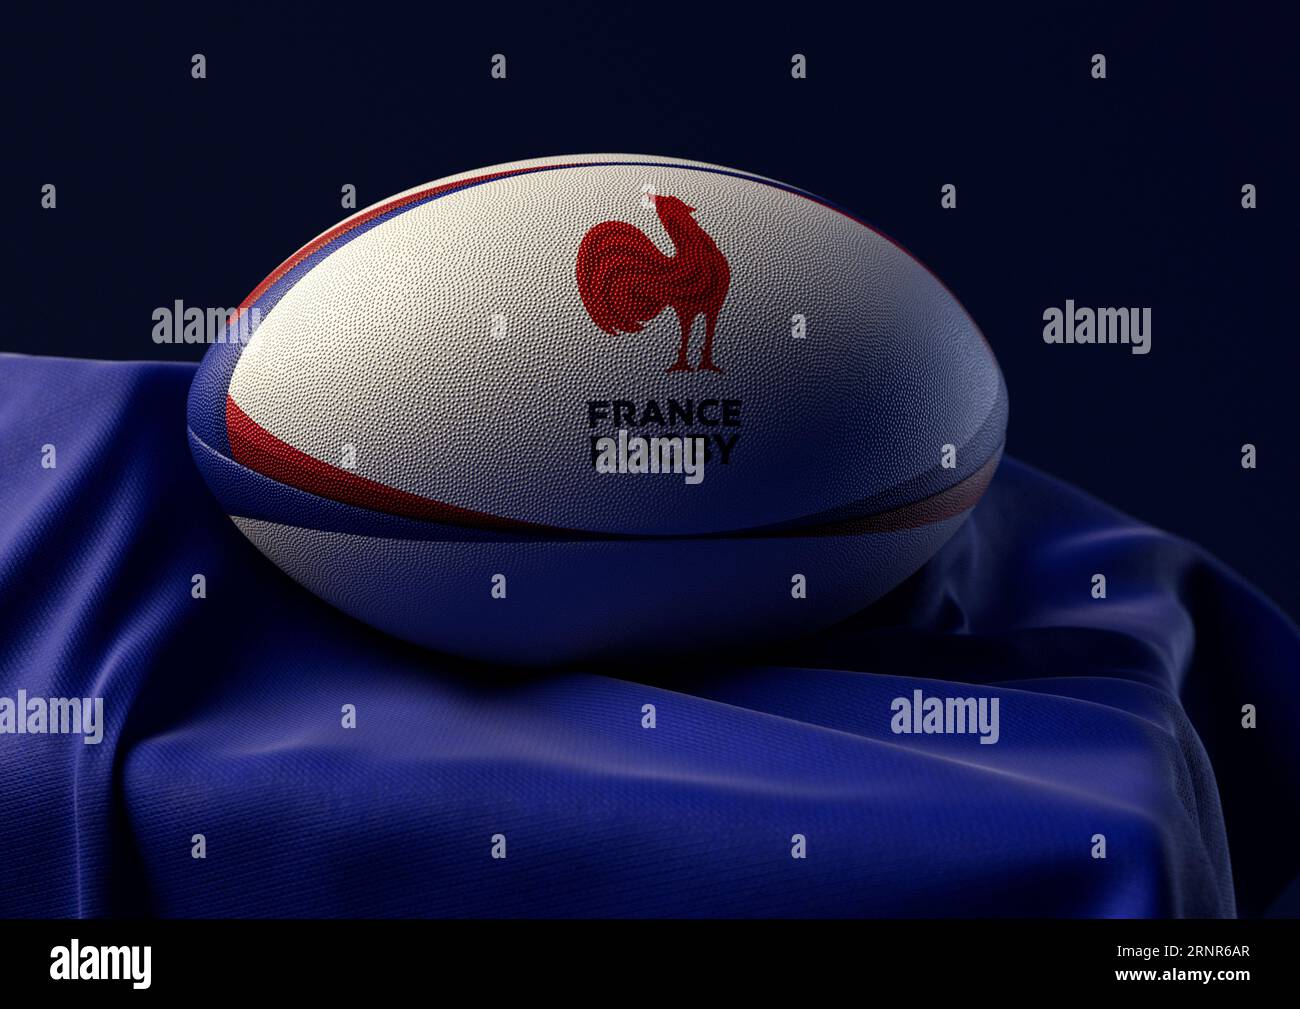 September 2, 2023 - Bristol, United Kingdom: A 3D render of a rugby ball imprinted with the France rugby logo resting on a draped blue fabric Stock Photo